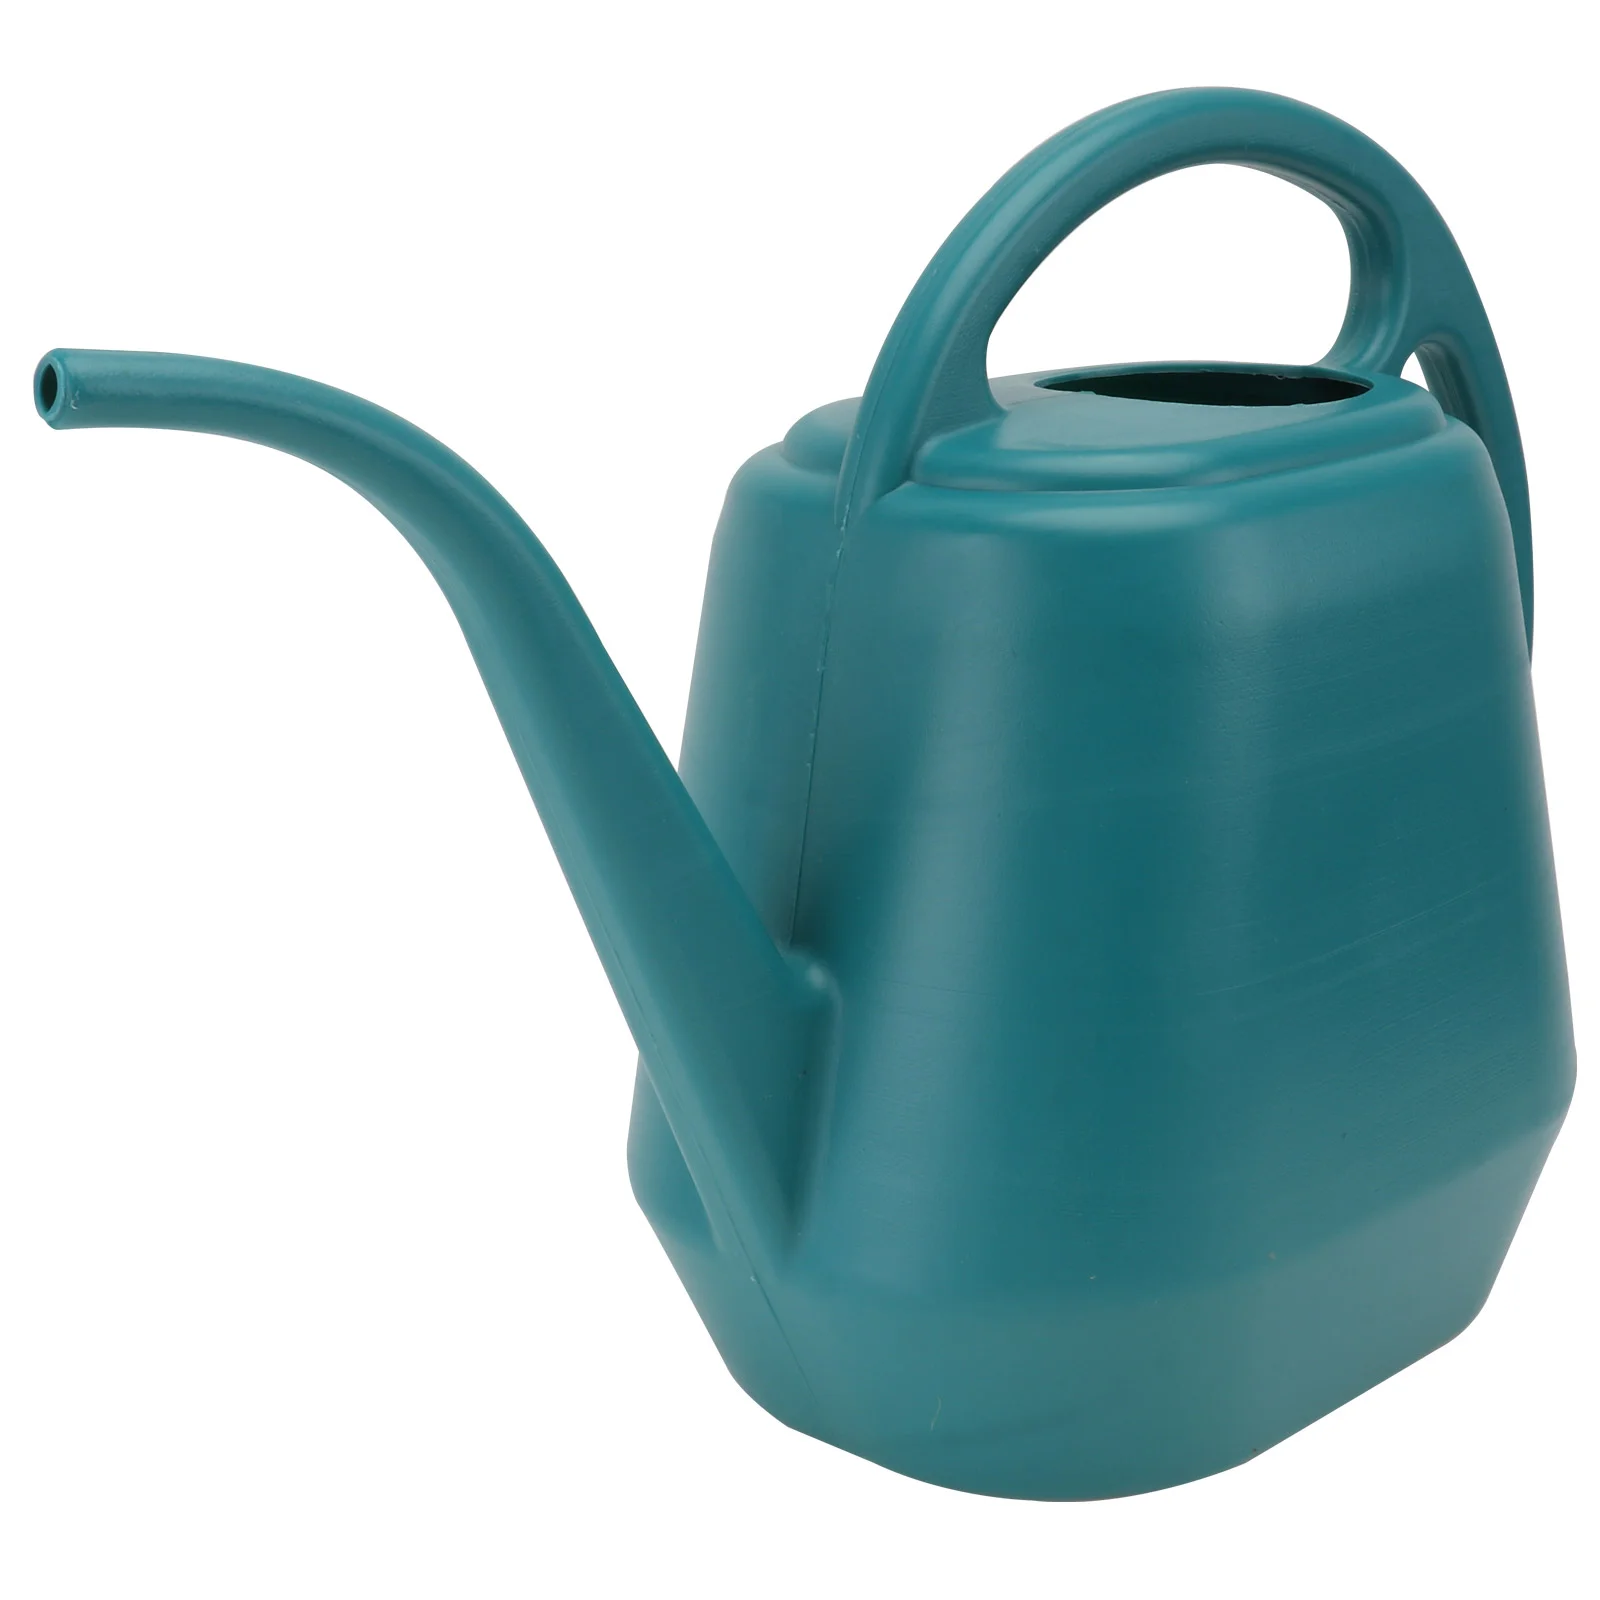 

Kettle Long Mouth Watering Can Plastic Sprinkling Gardening Irrigation Pot Bottles Kids Wing Refillable Child Indoor